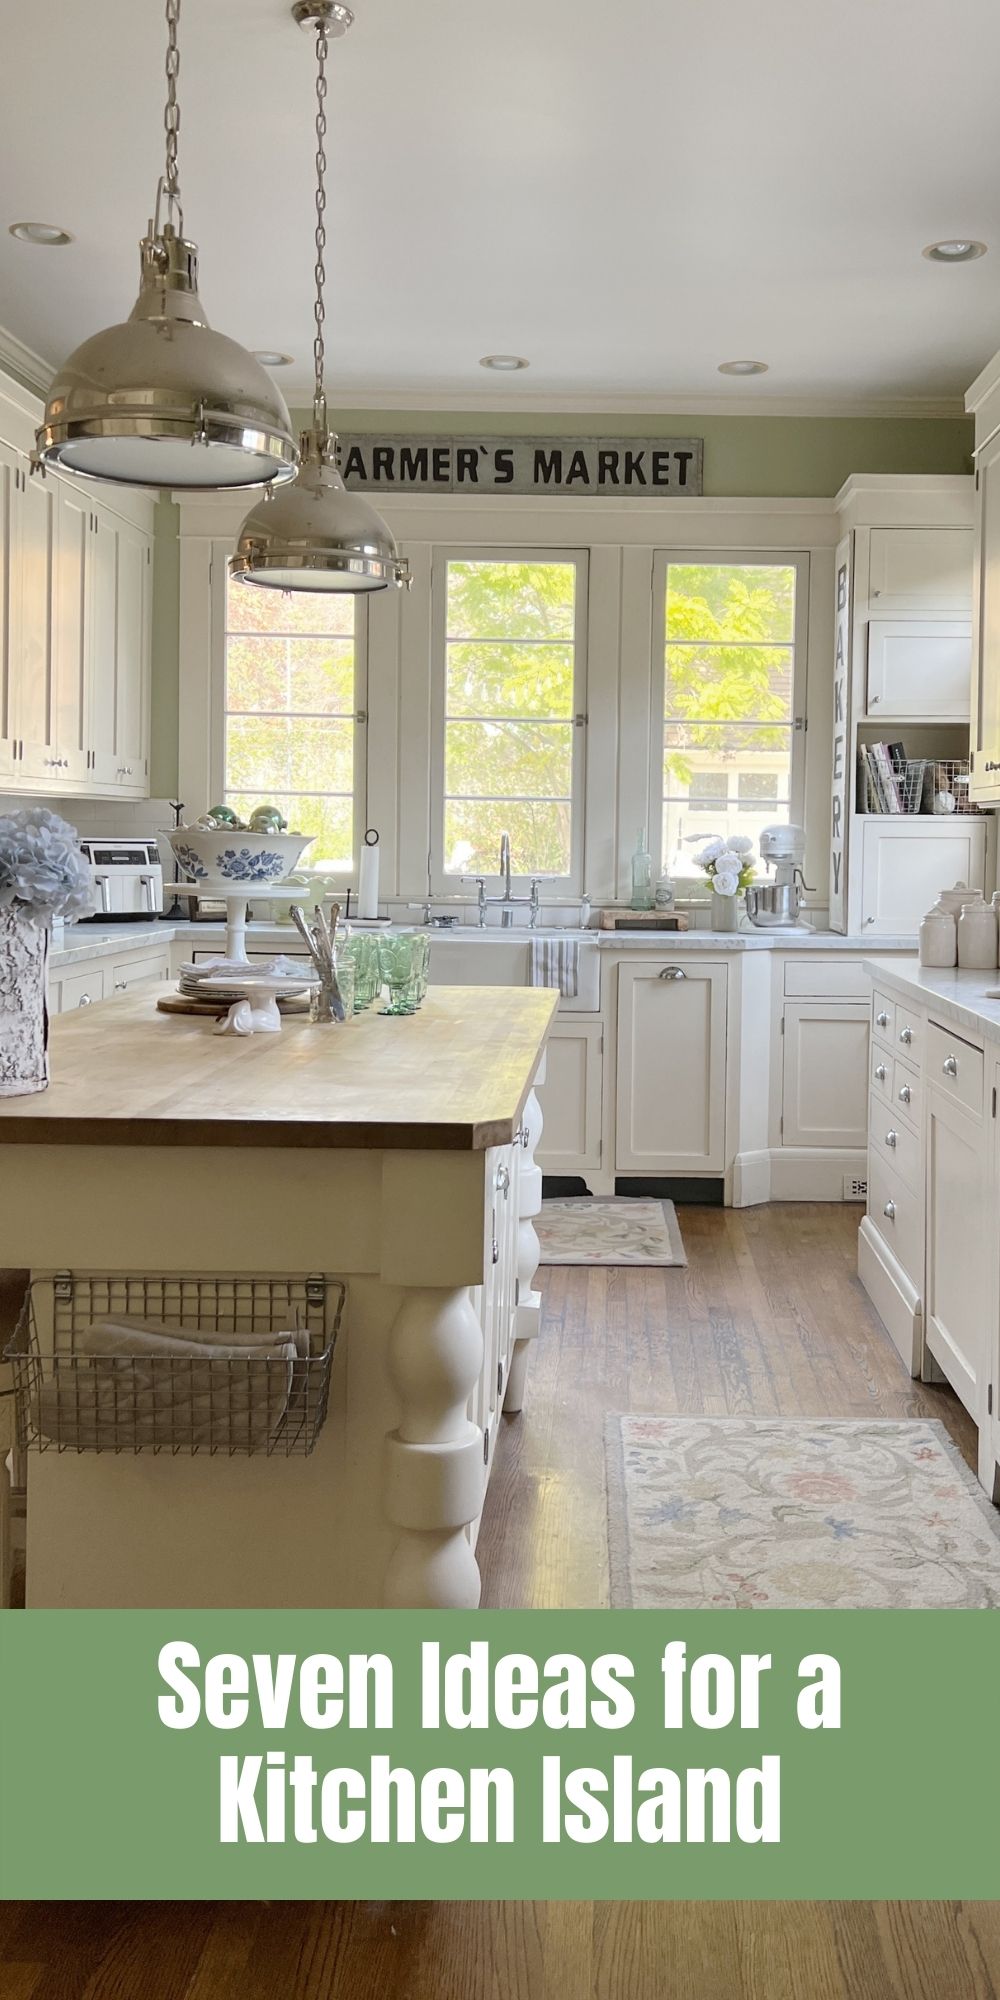 Kitchen Islands are not only practical, but they increase the value of your home. Today I am sharing my white kitchen island and seven ideas for yours.